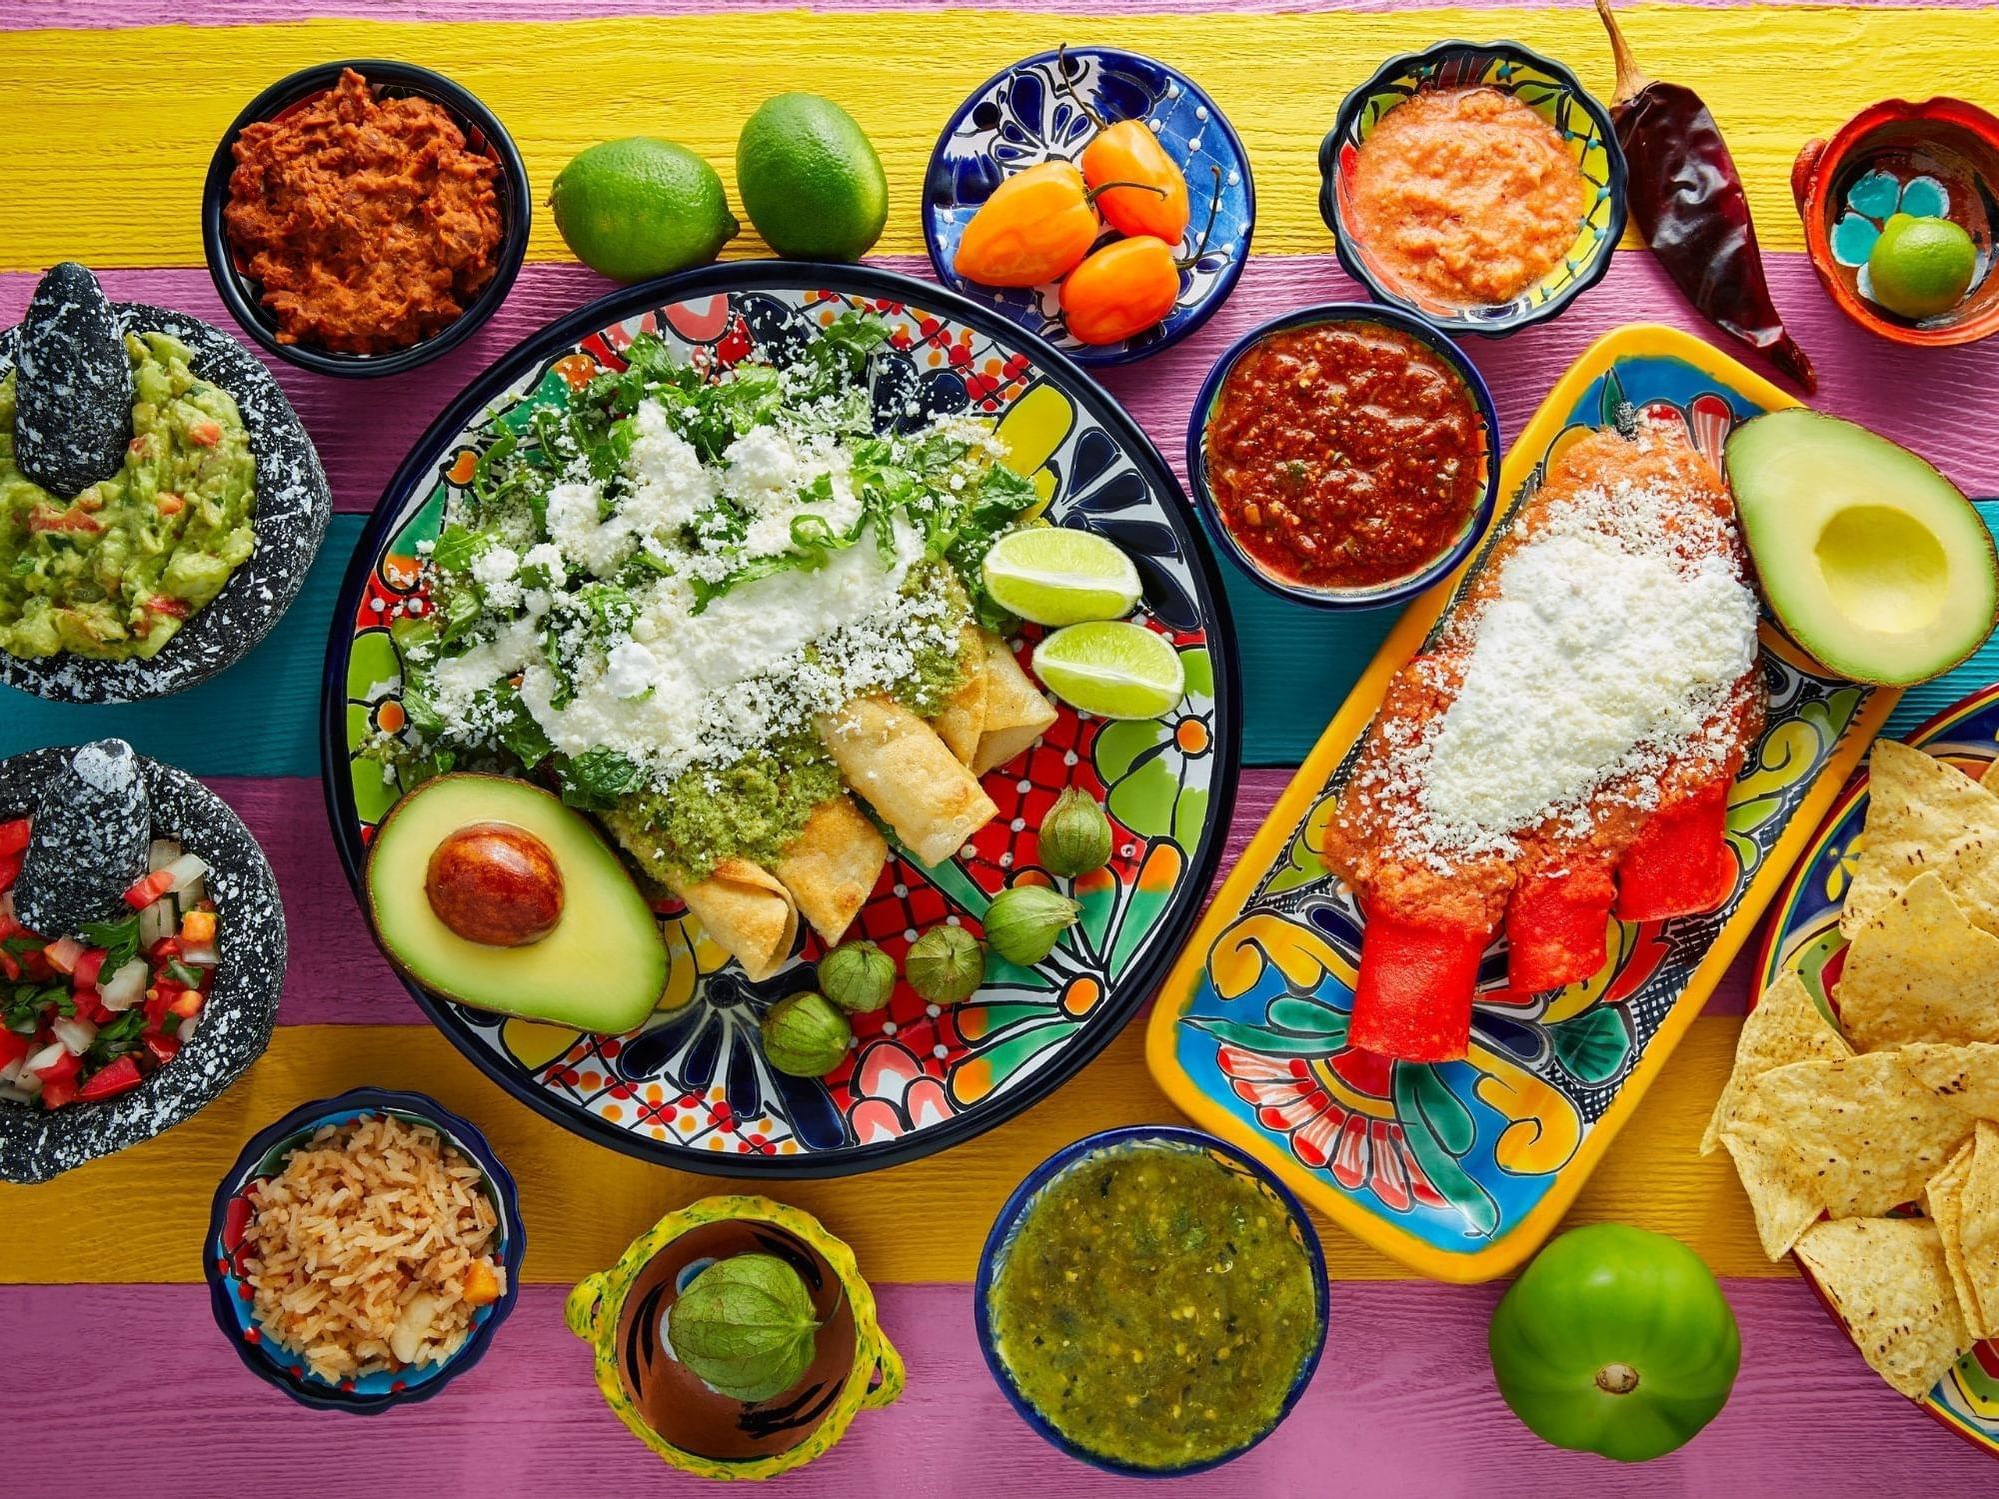 Colorful table with mexican food including enchildas and salsa